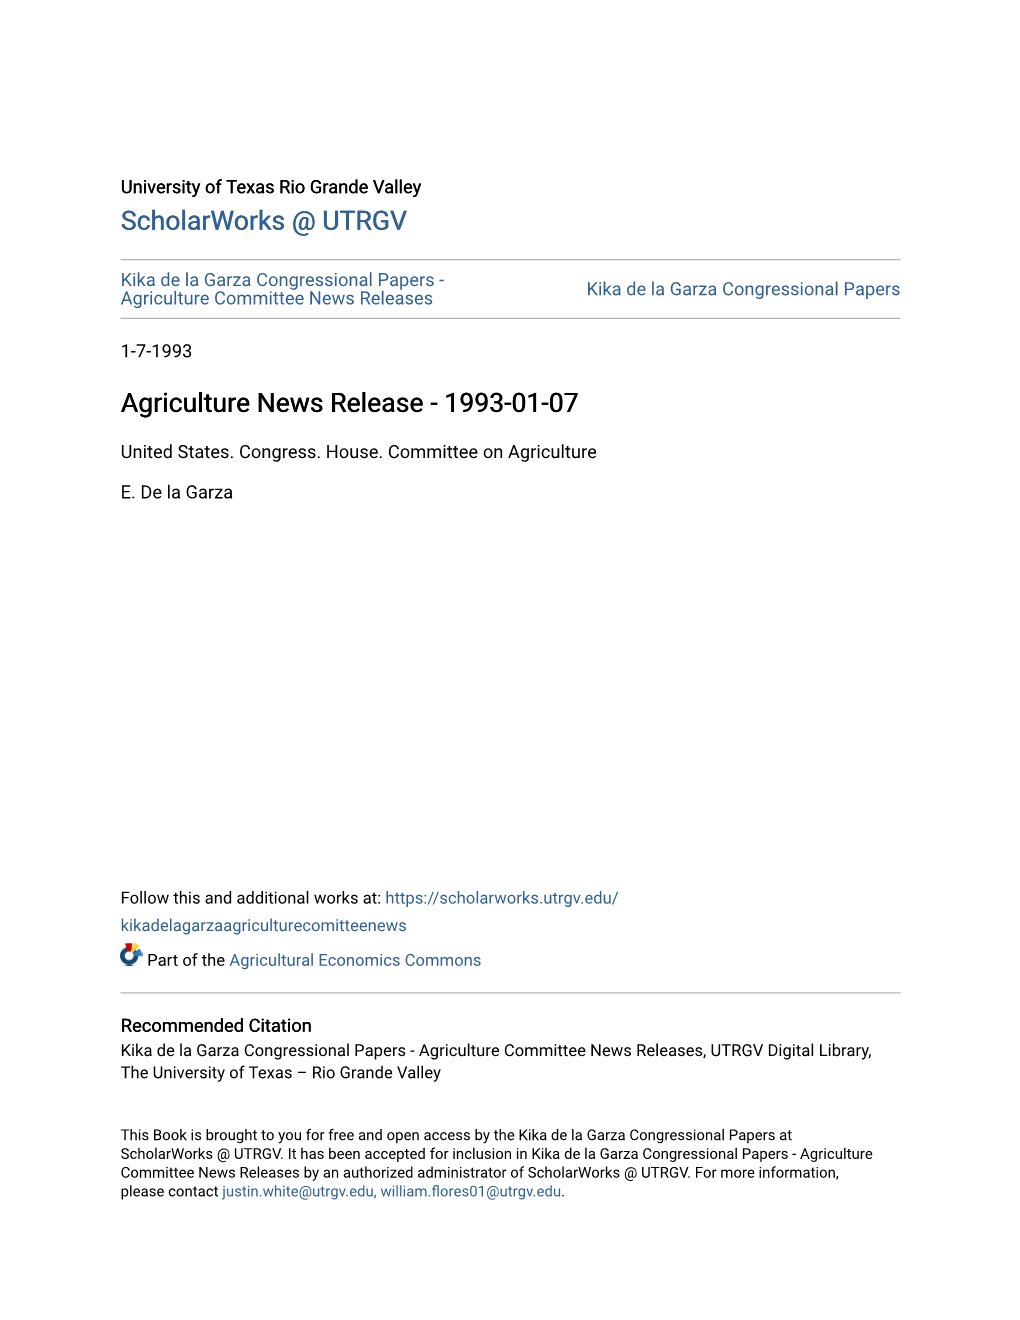 Agriculture News Release - 1993-01-07